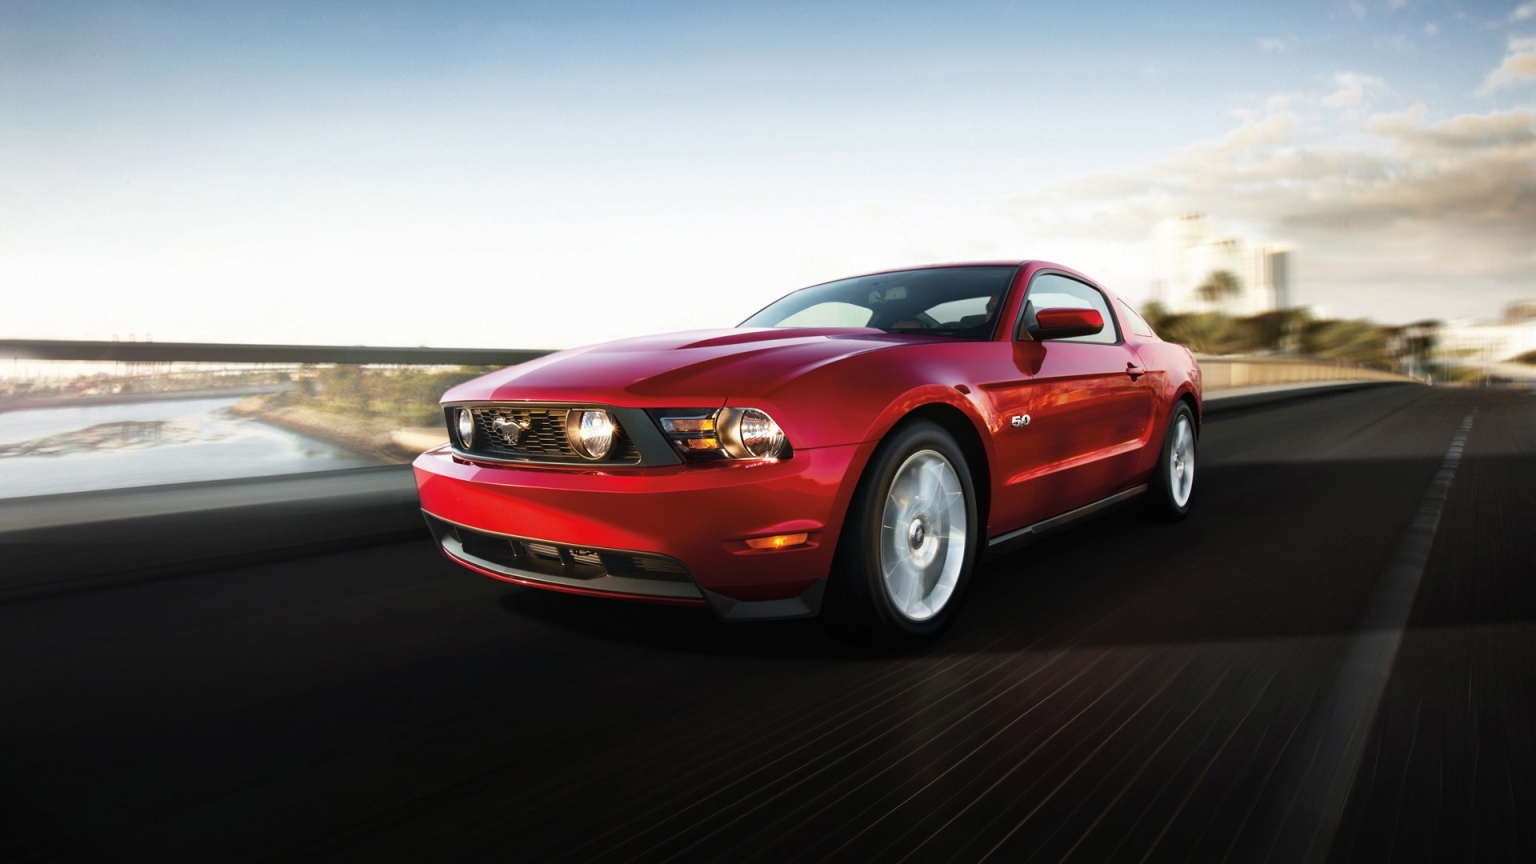 Ford Mustang GT 2012 for 1536 x 864 HDTV resolution